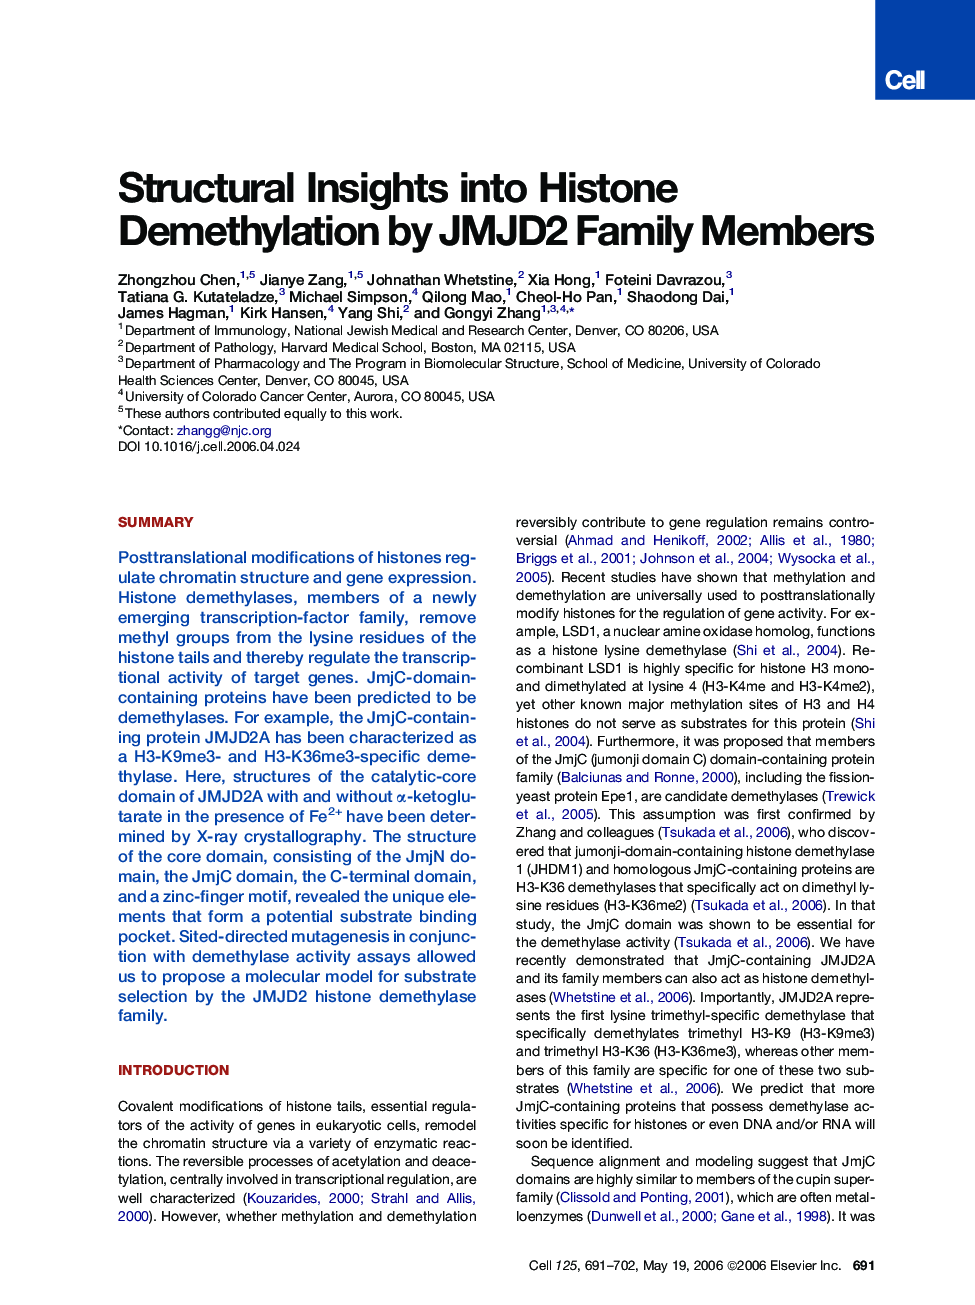 Structural Insights into Histone Demethylation by JMJD2 Family Members